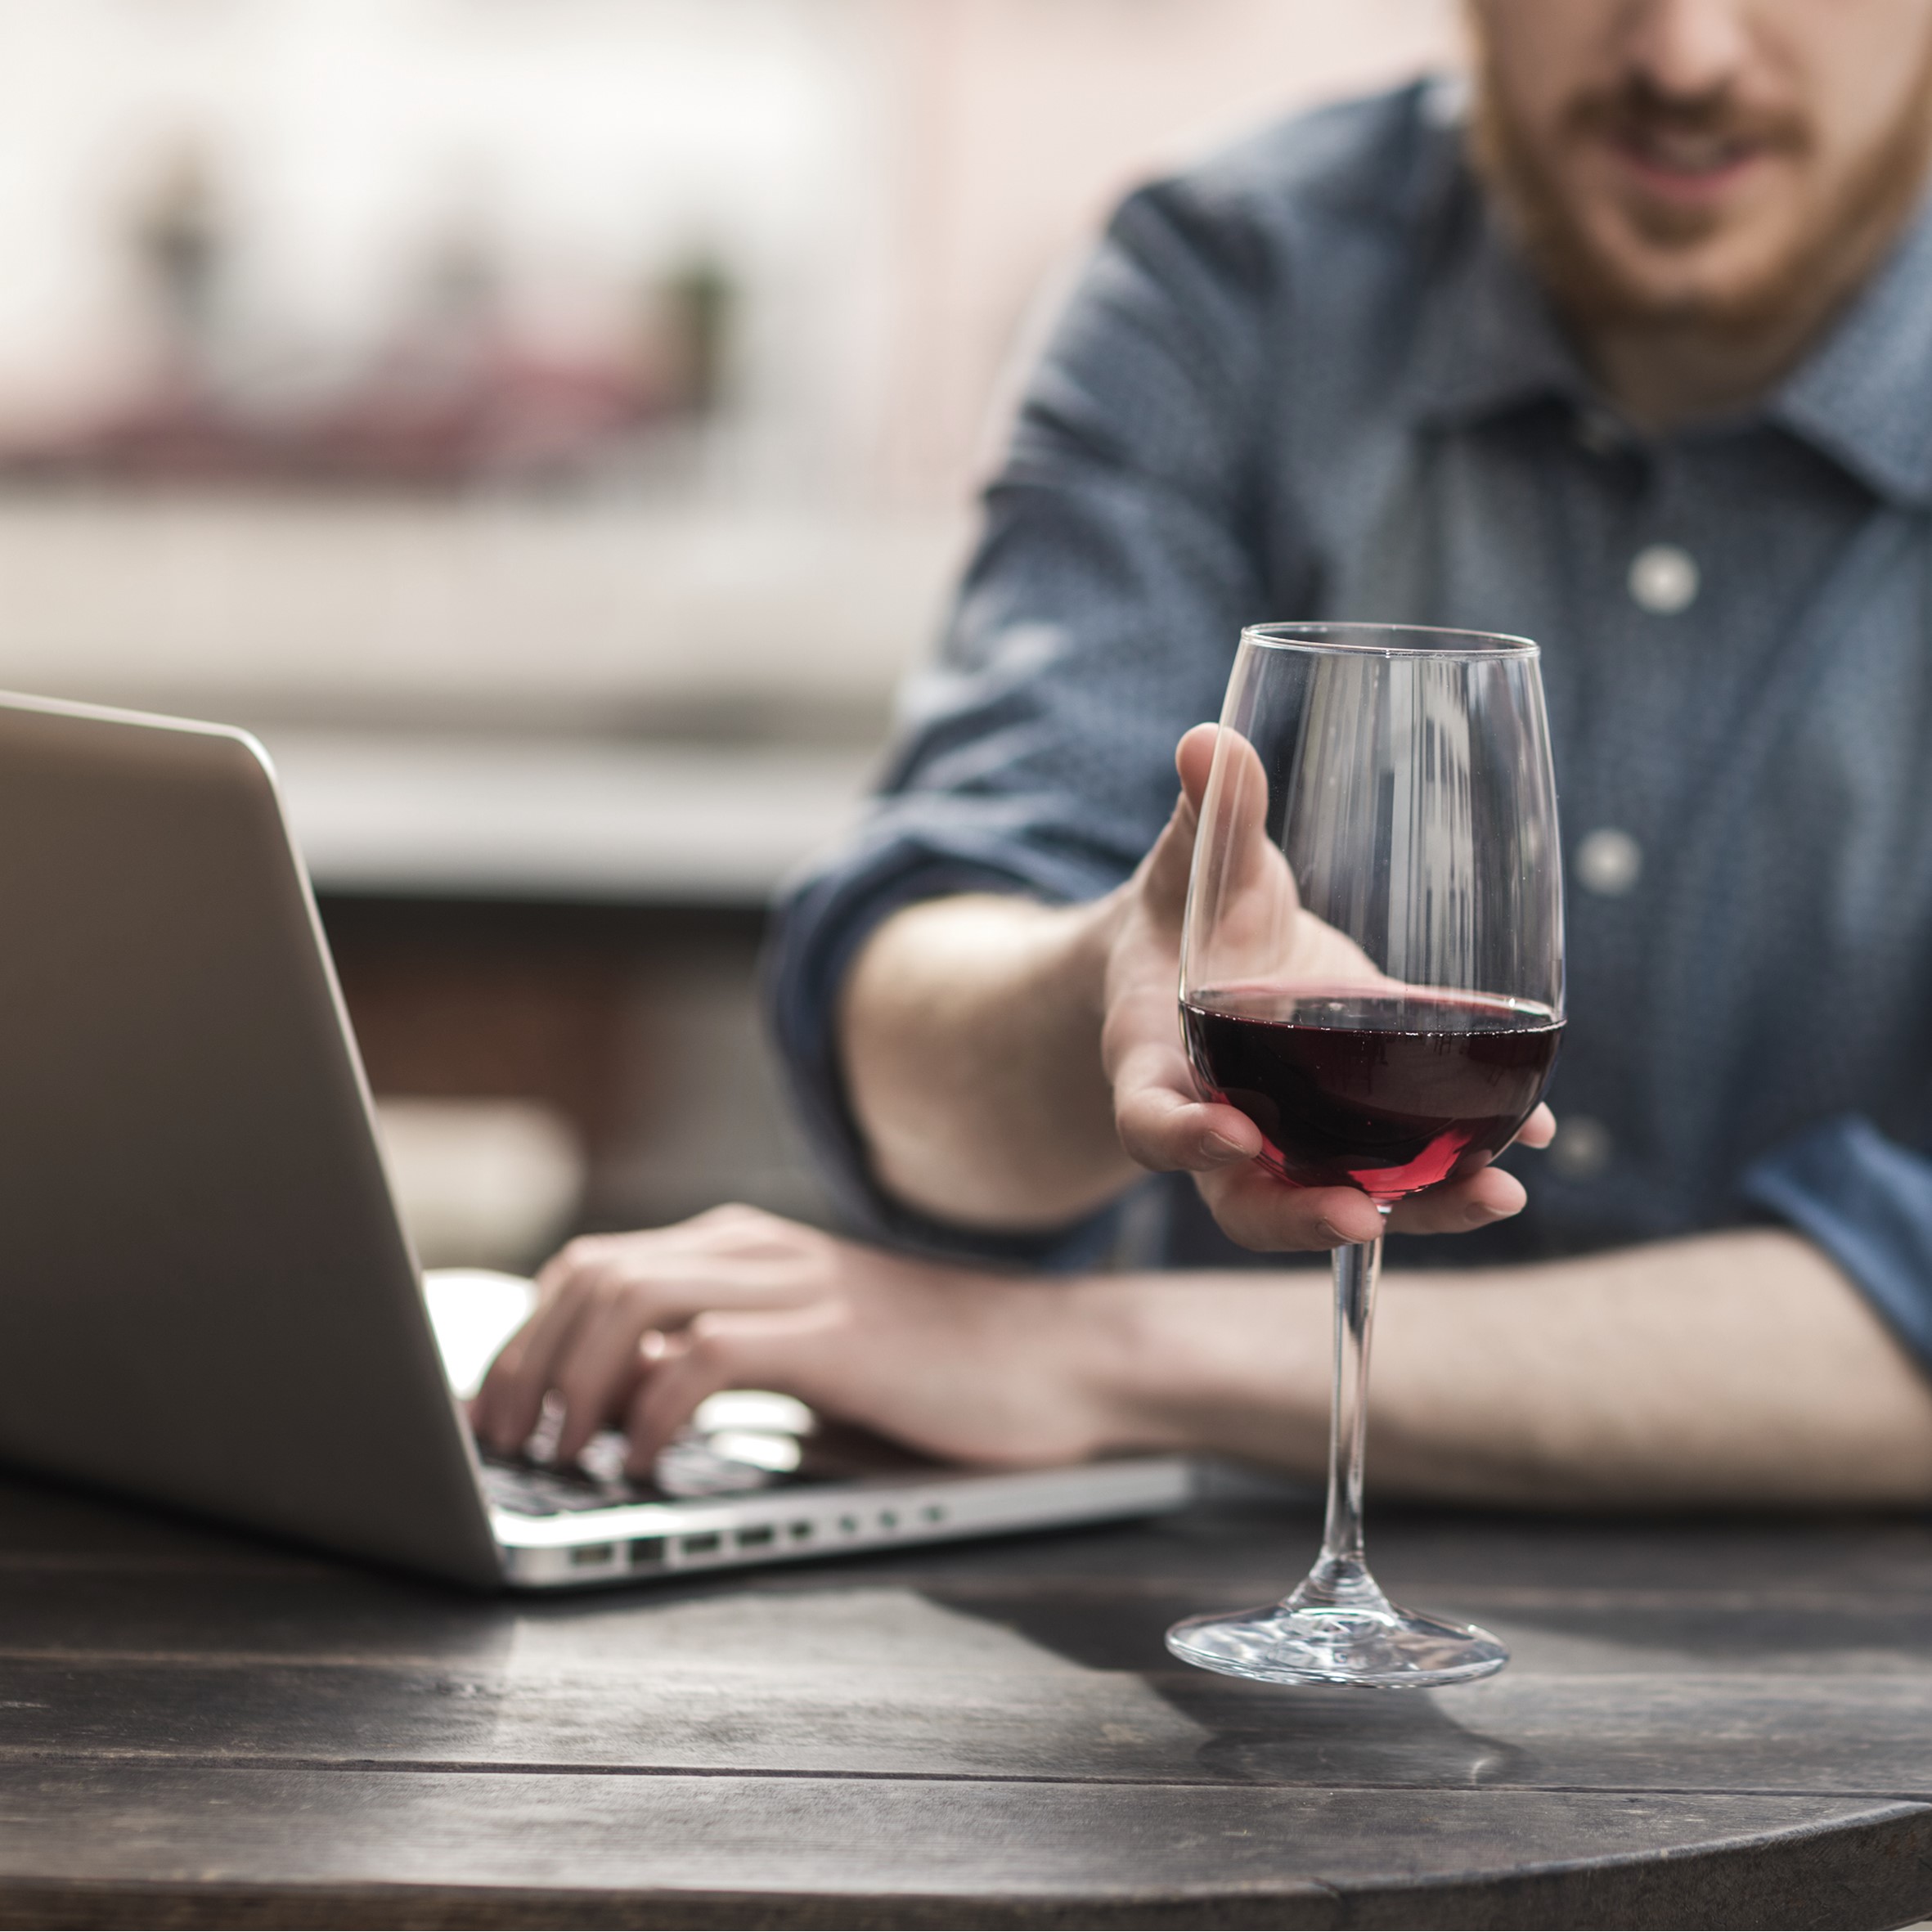 Brazil technology 2 - Strong momentum for online wine buying post-pandemic in US, China and UK